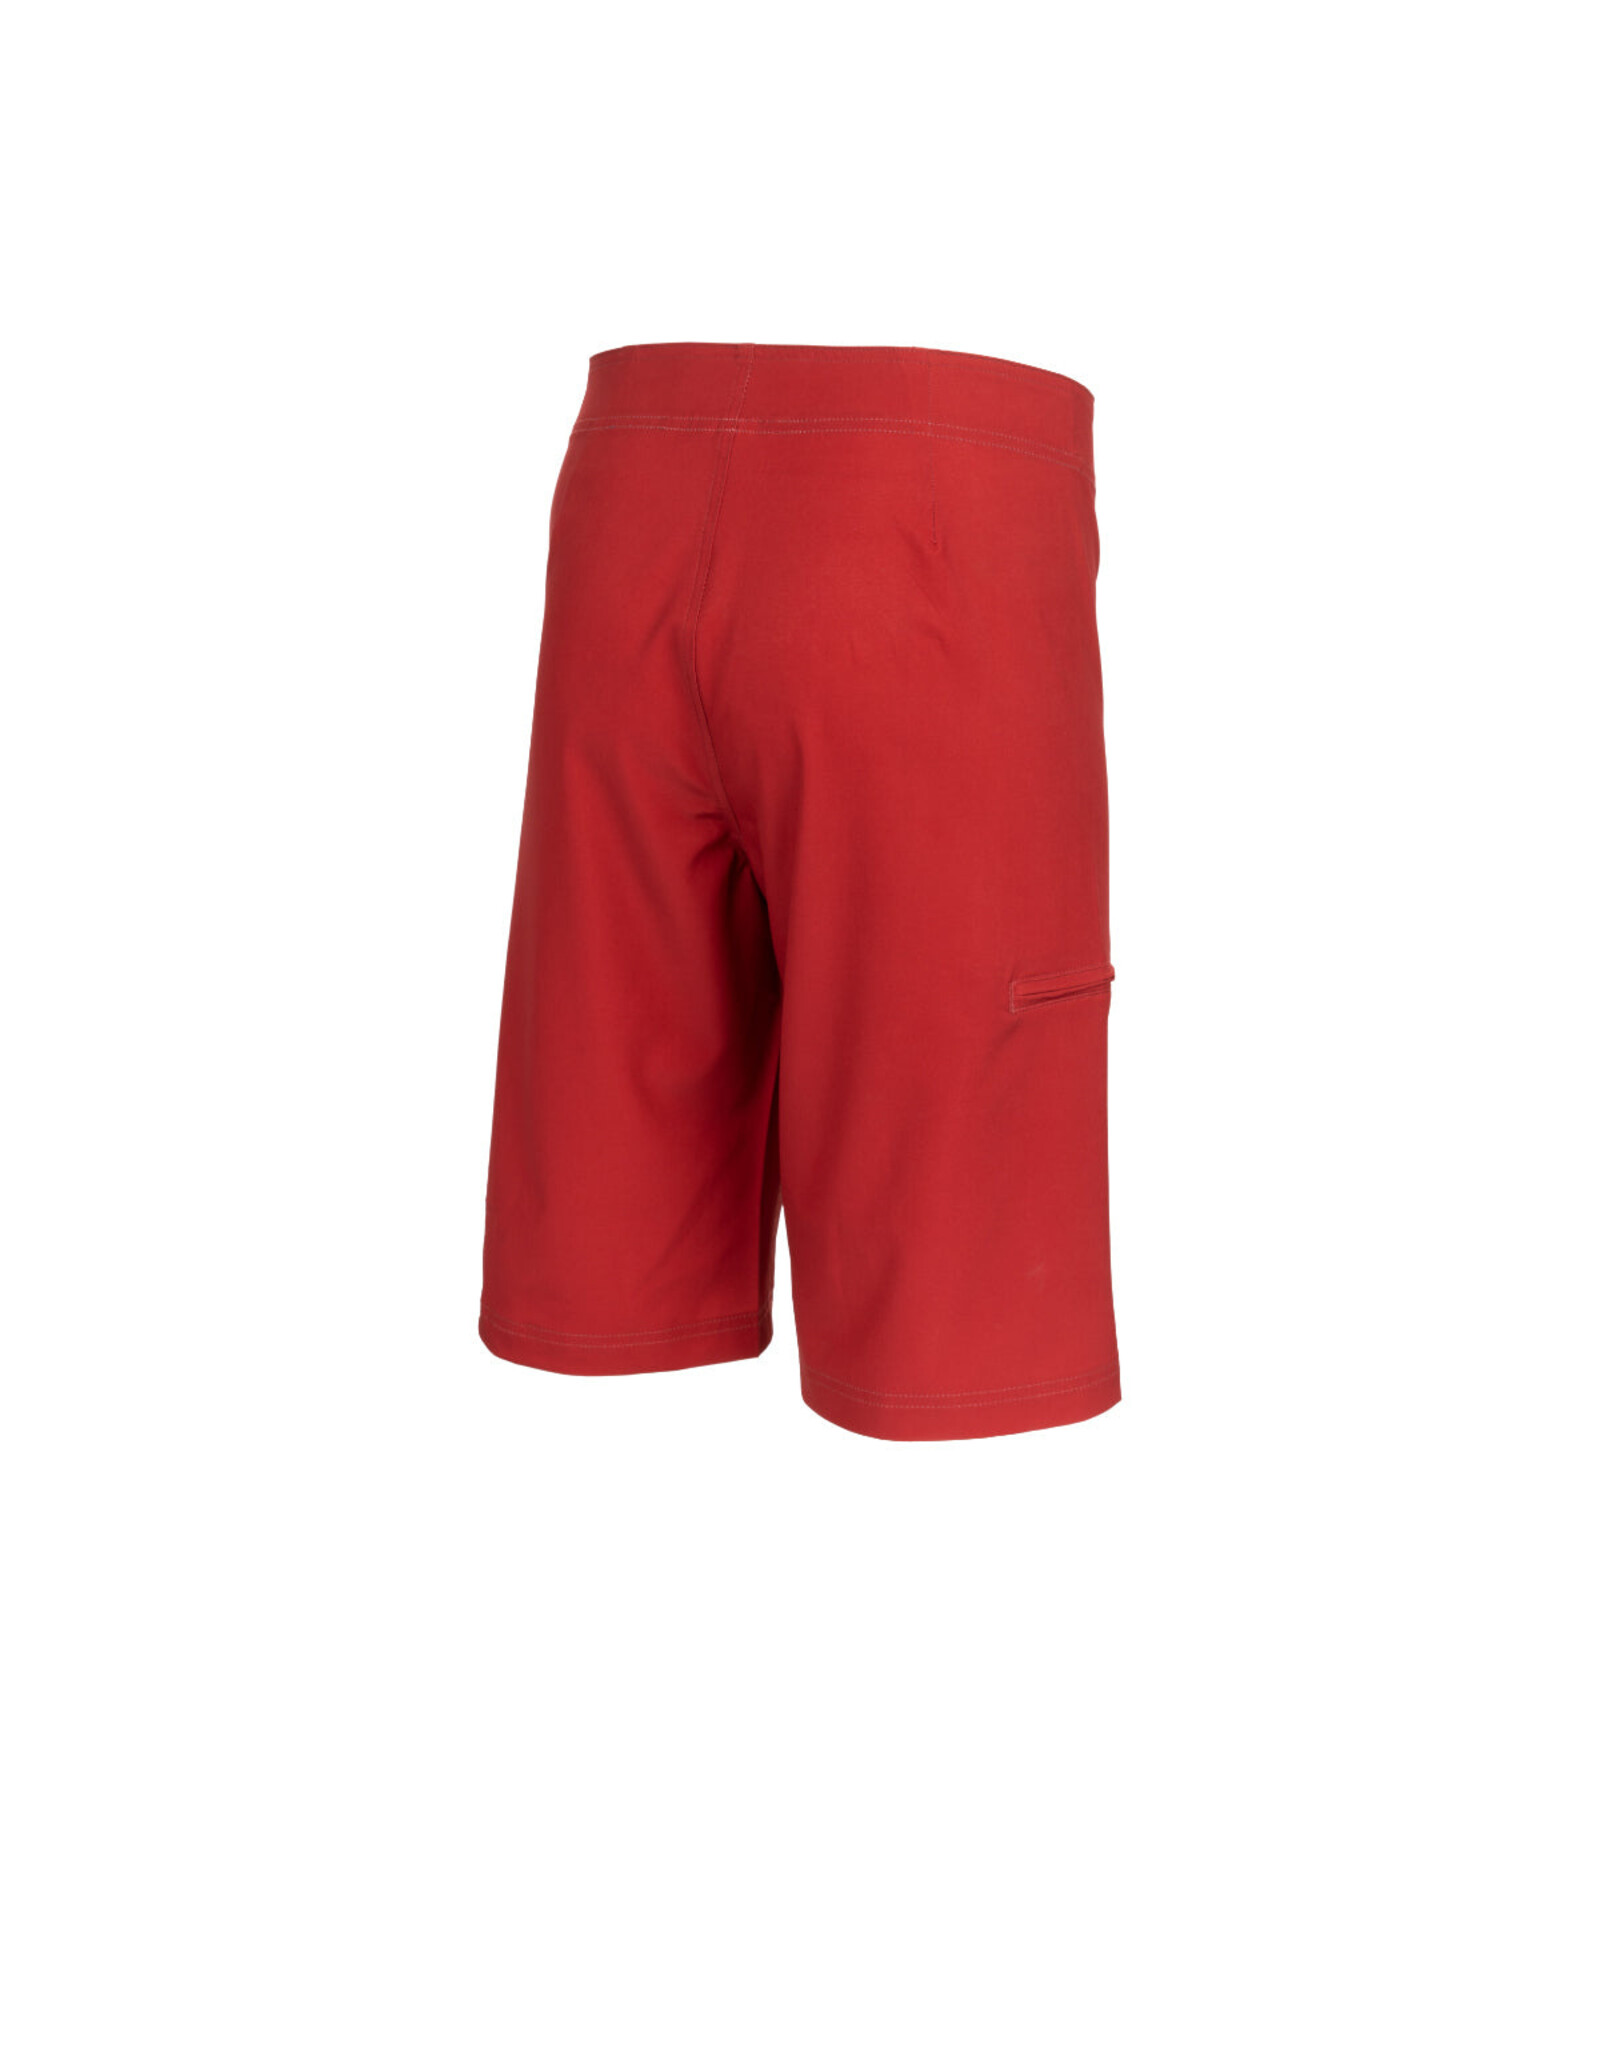 Immersion Research IR Heshie Shorts - Mens